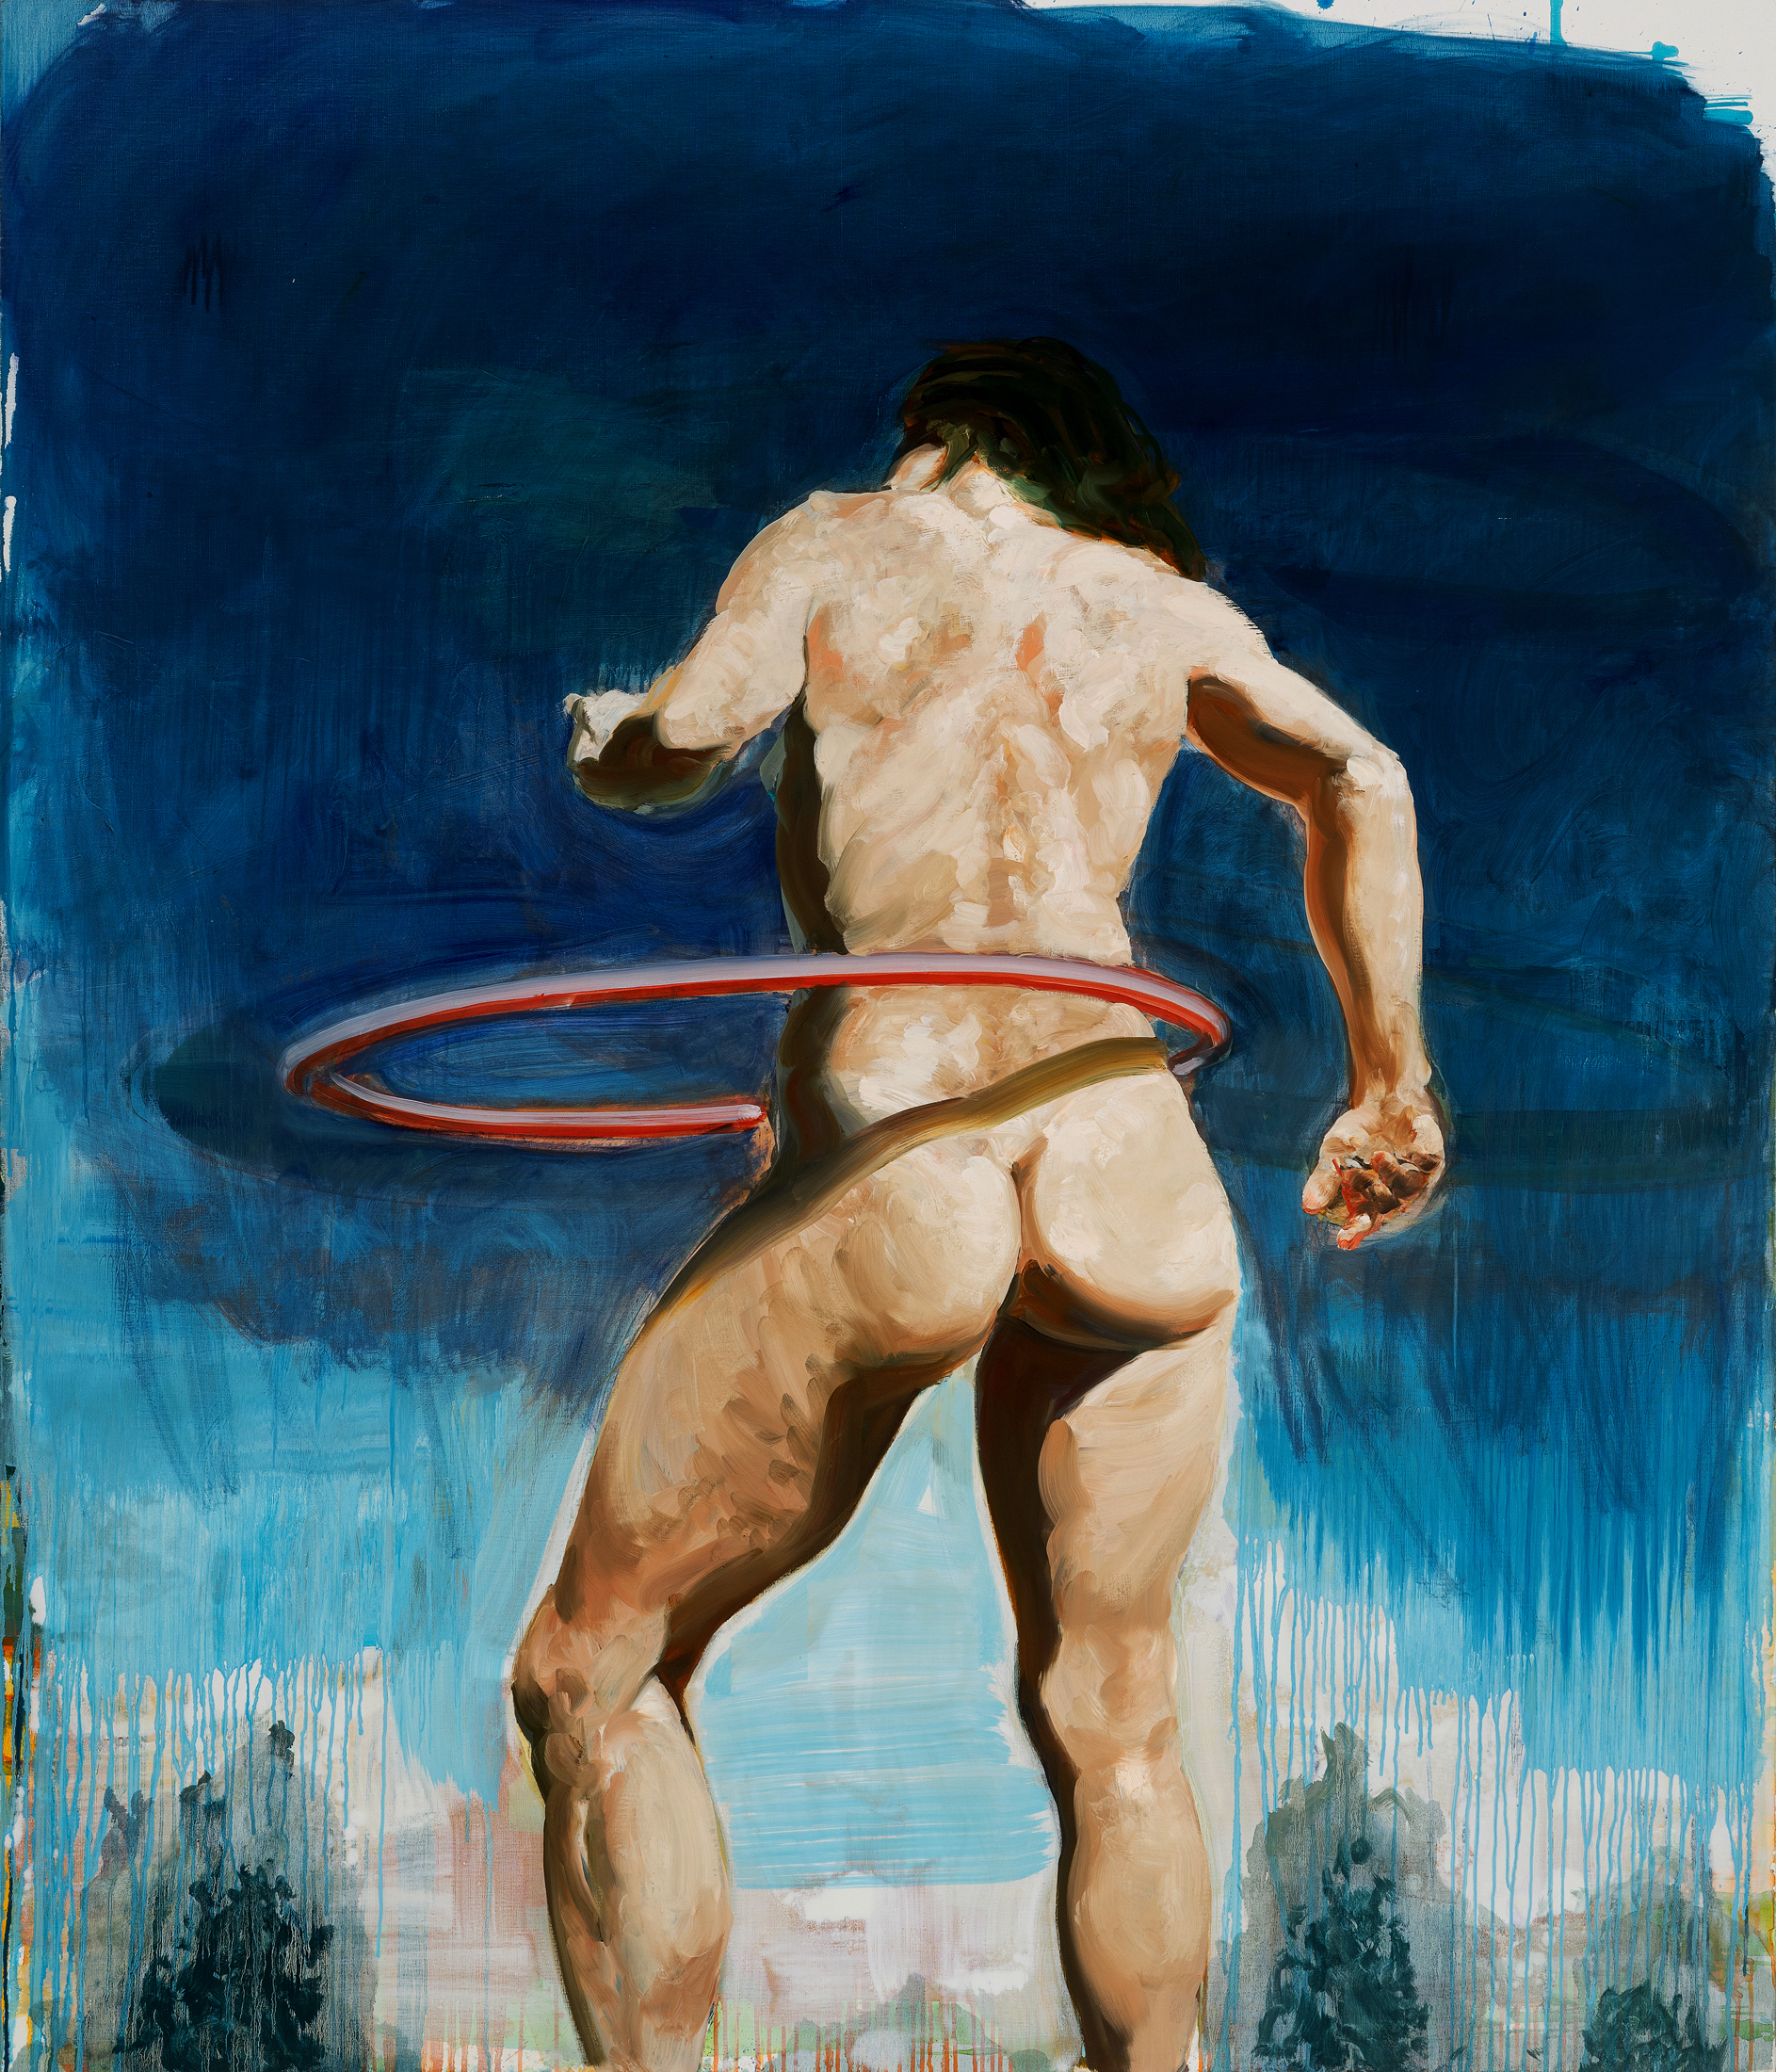 Eric Fischl American Hula 2020 Courtesy of the artist and Skarstedt, New York.